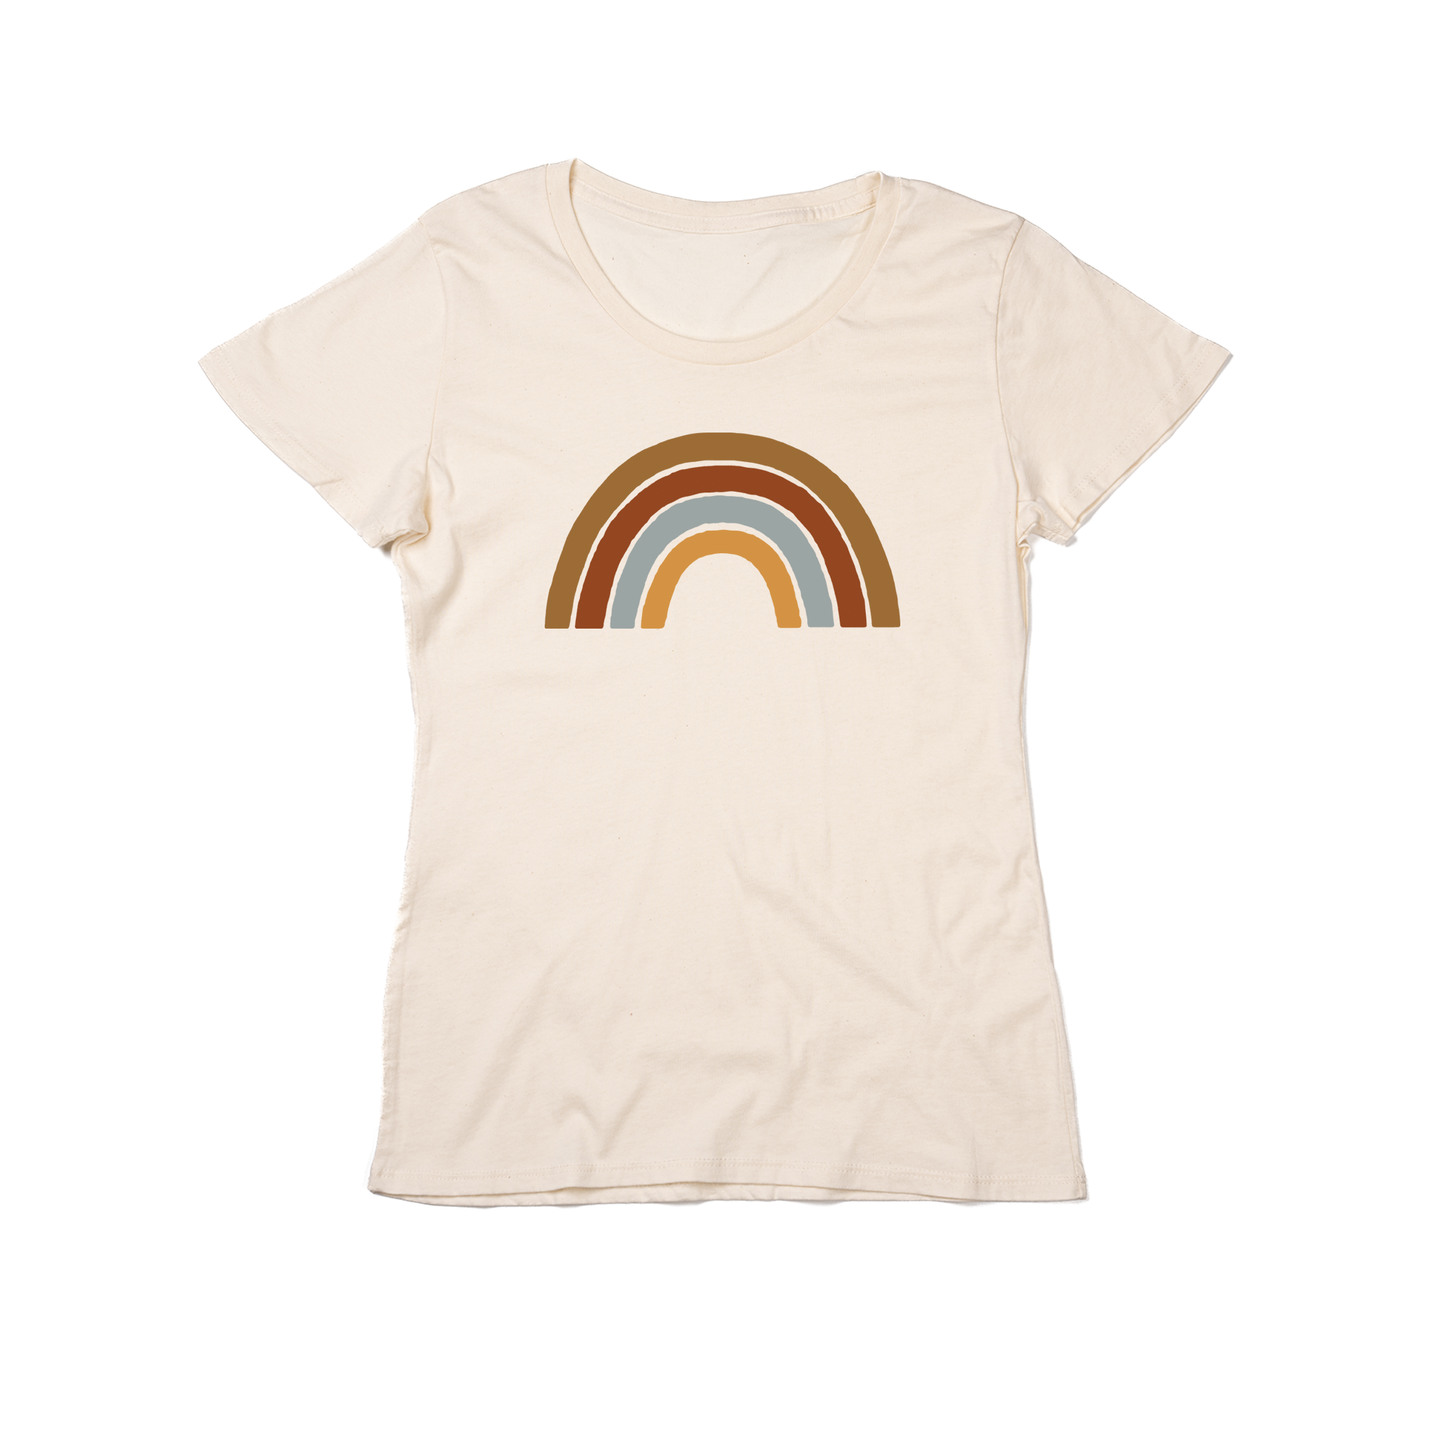 Rainbow (5 Color Options, Color Option #3) - Women's Fitted Tee (Natural)